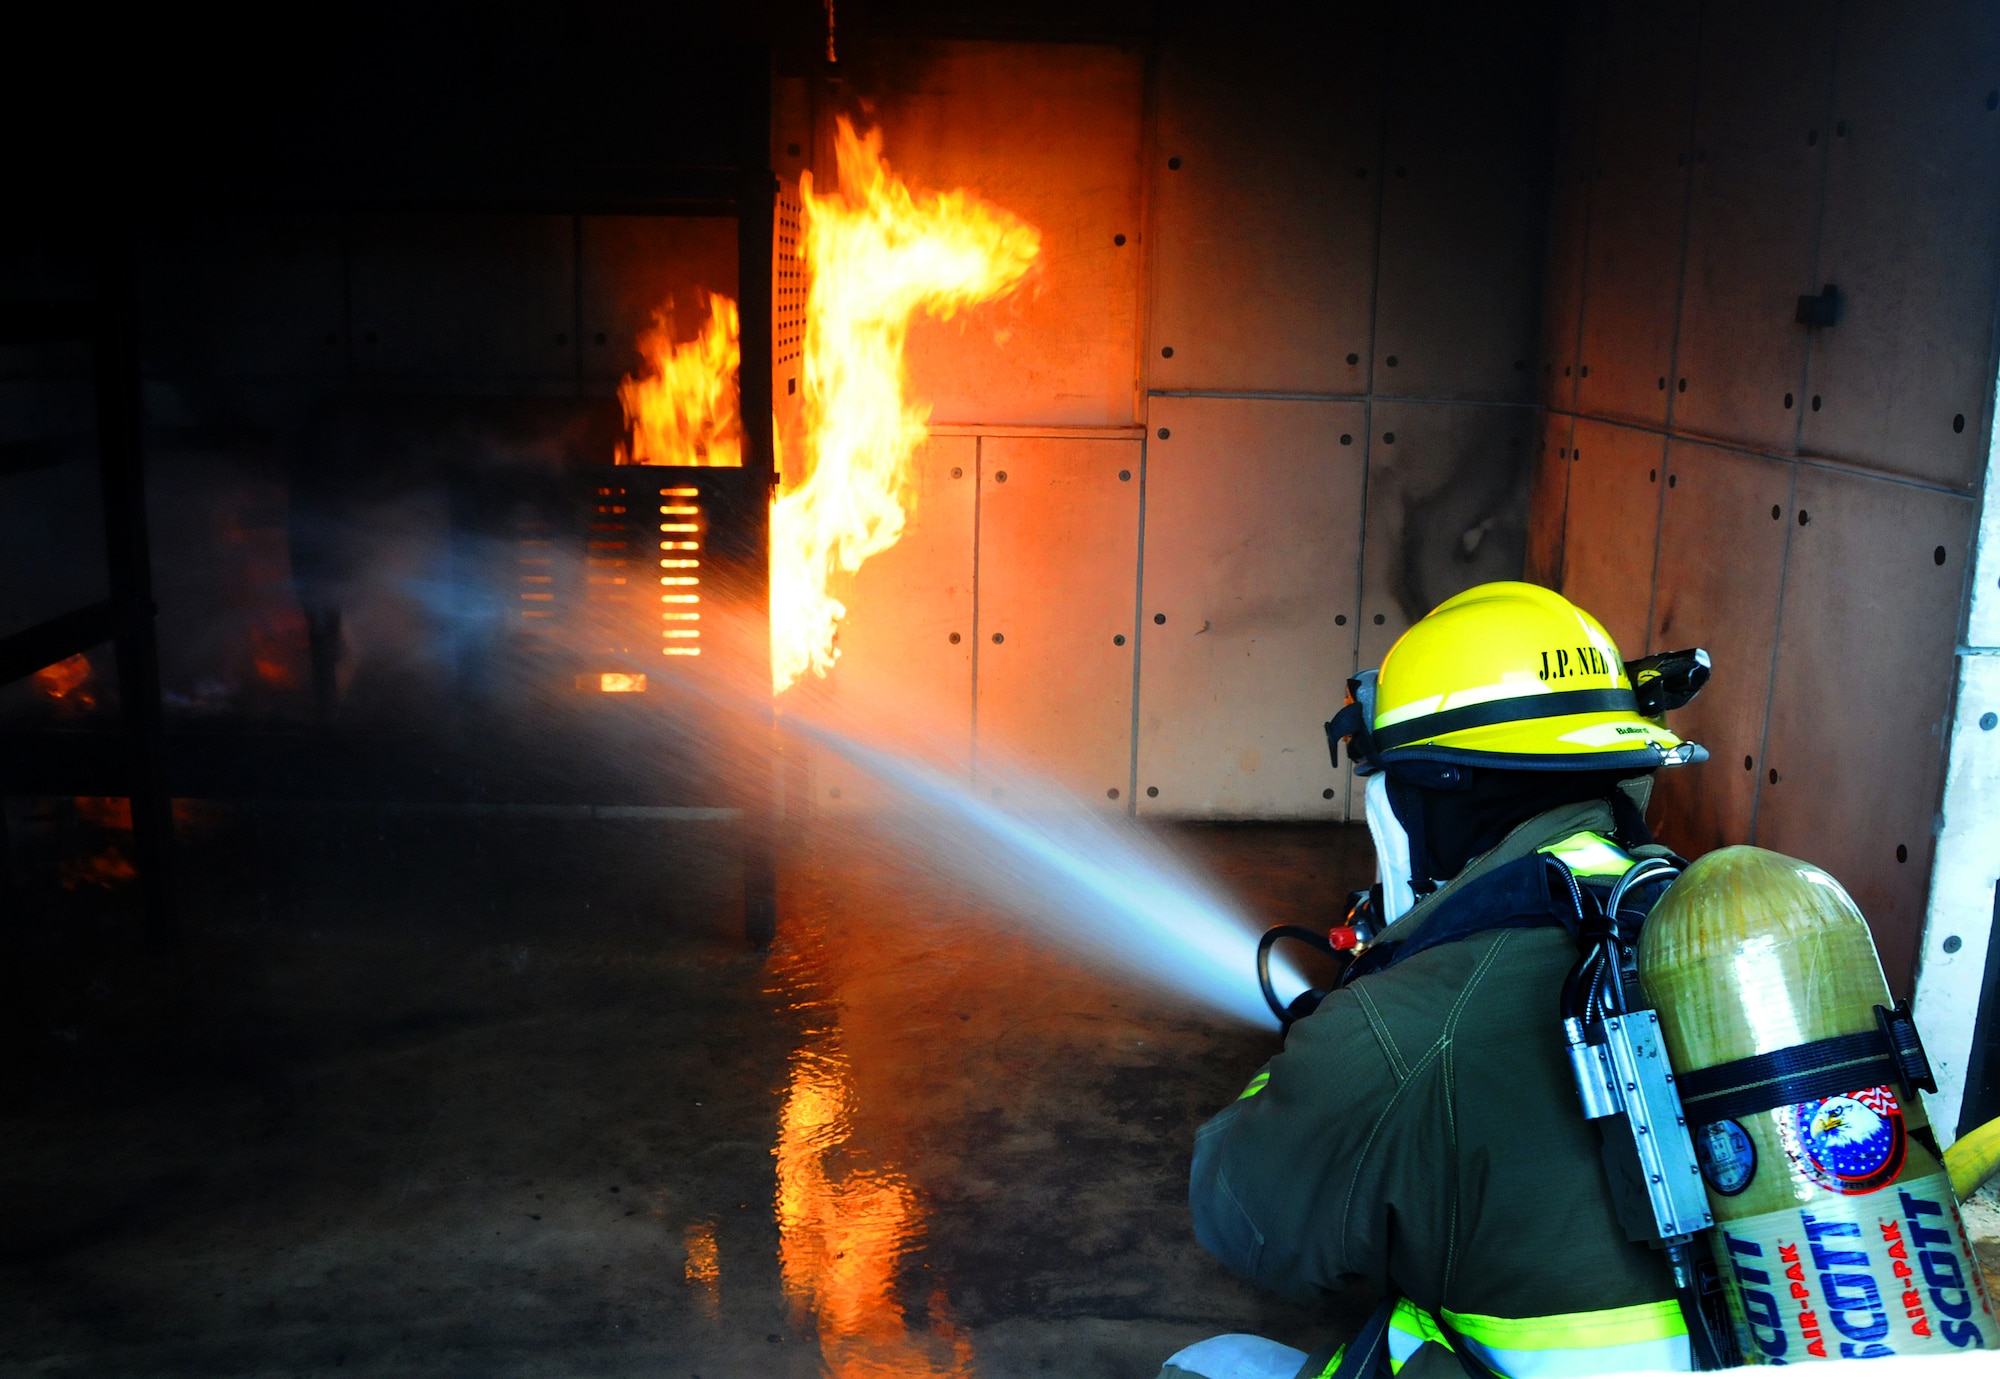 ANDERSEN AIR FORCE BASE, Guam - Yigo firefighter Roy Siongco puts out a fire during a joint training mission with Department of Defense, Government of Guam and Guam International Airport fire departments here Jan 22. Firefighters must be able to think clearly, critically, and solve problems quickly under extreme stressful situations--joint training experiences help to hone these important skills. (U.S. Air Force photo by Airman 1st Class Courtney Witt)   